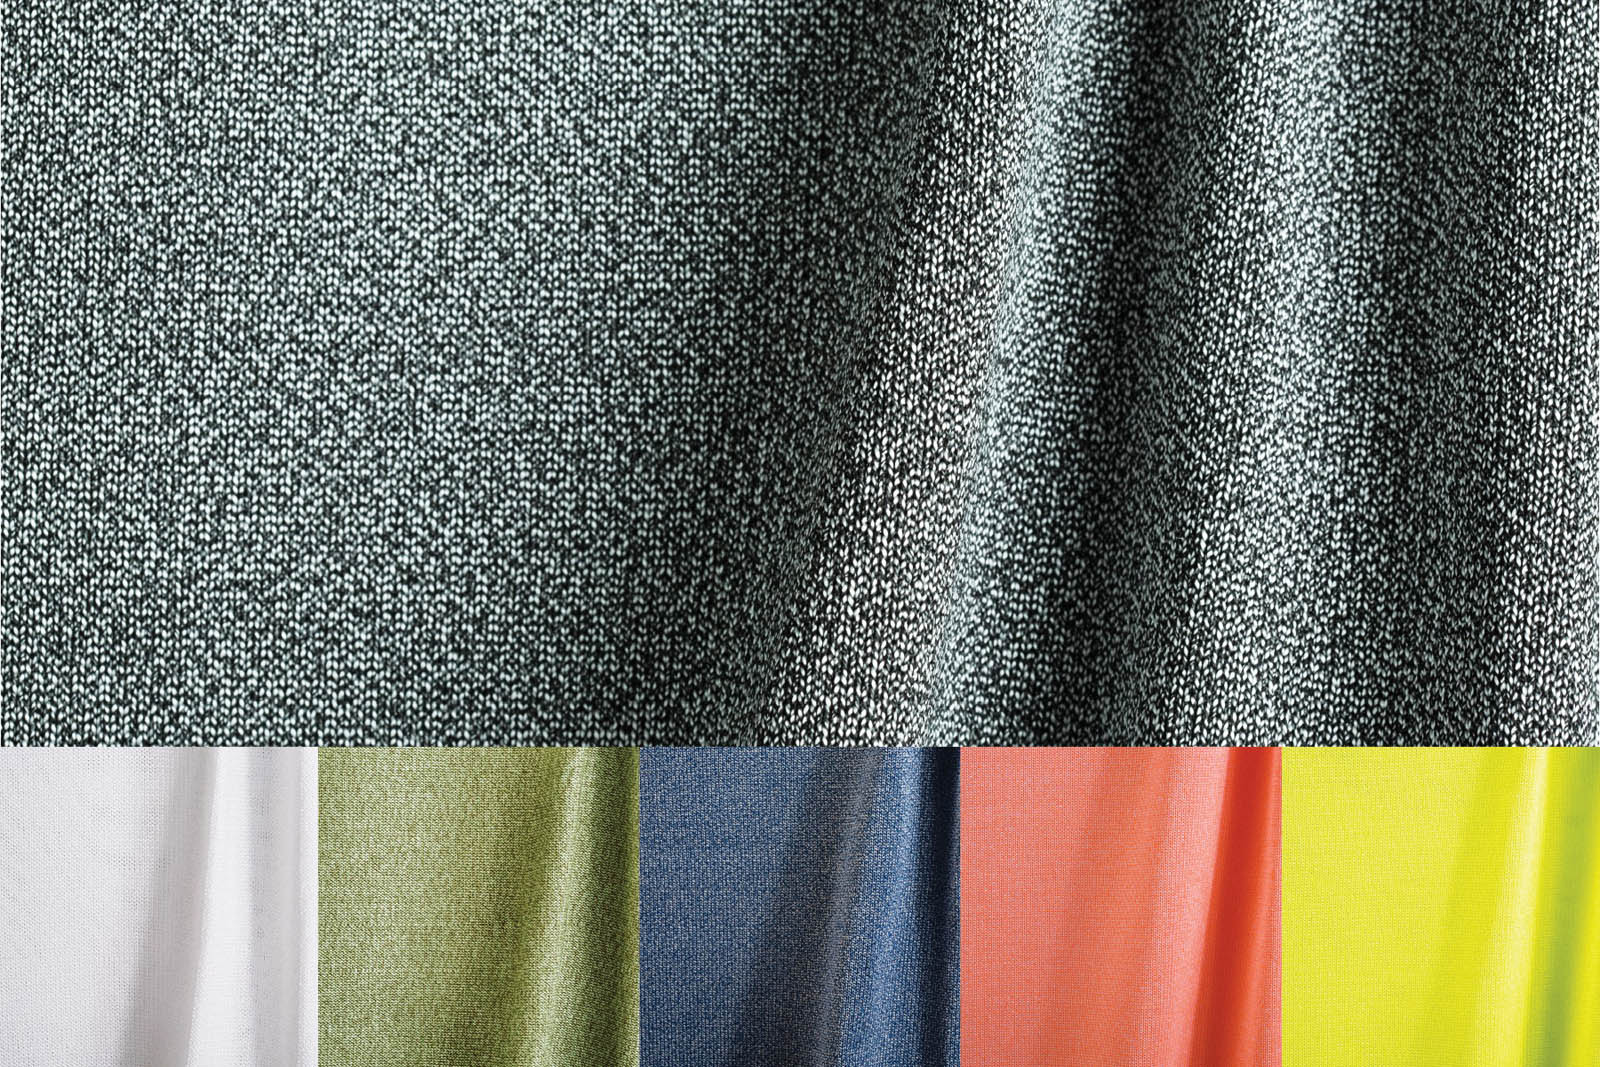 Cut-resistant fabric - Specialty Fabrics Review